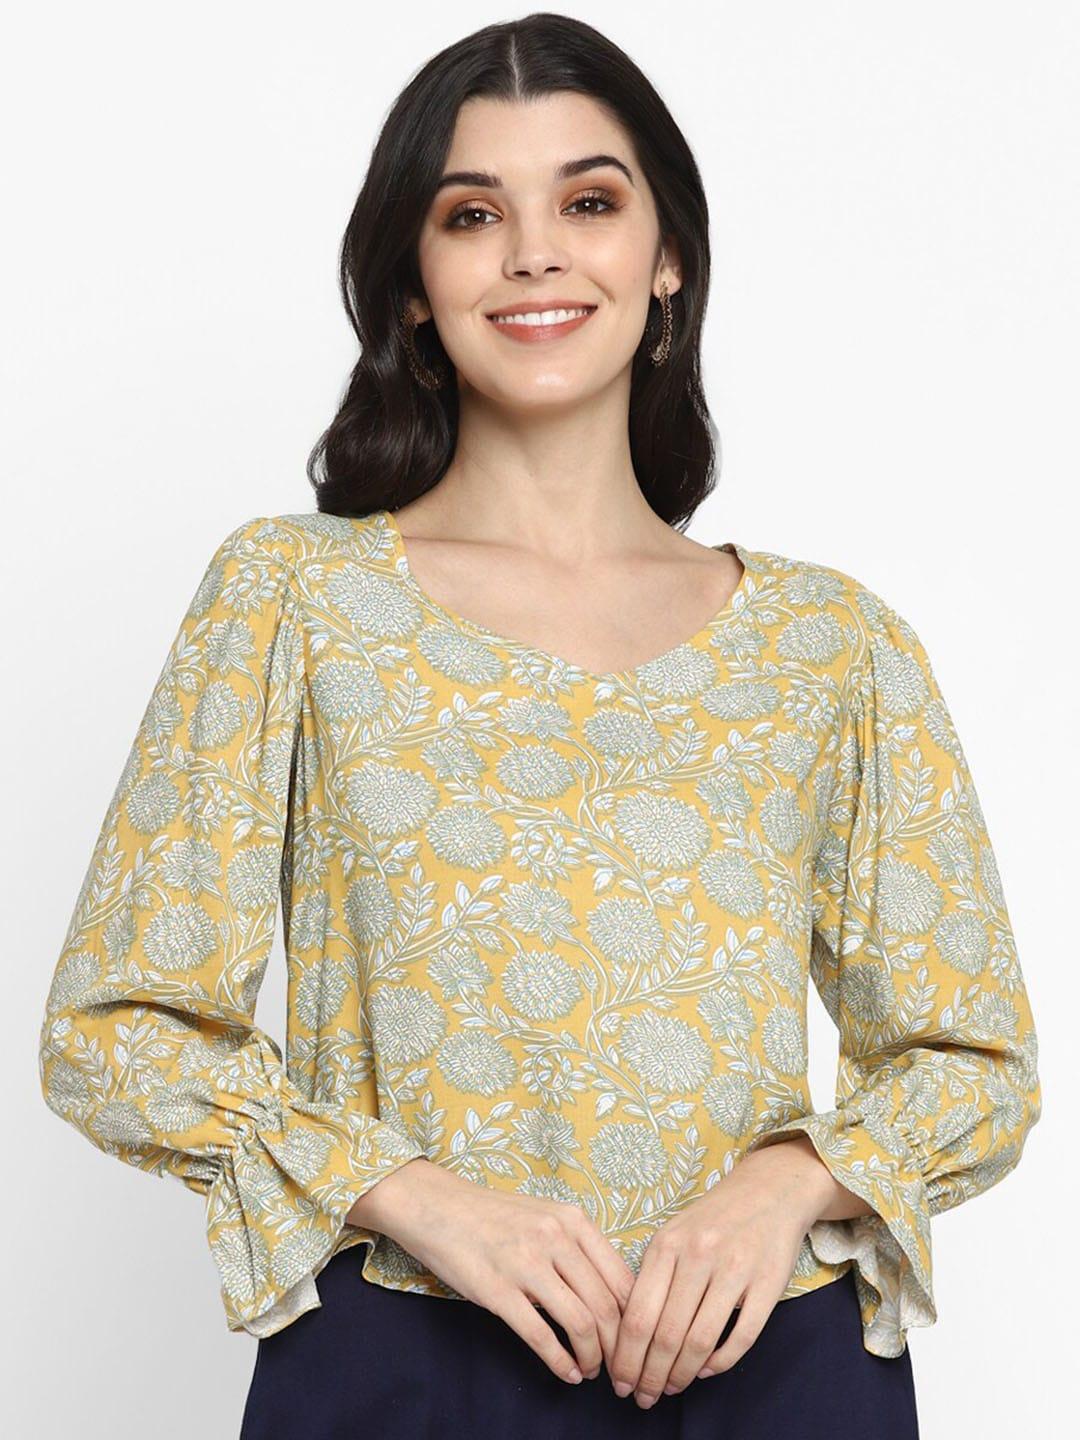 deebaco-mustard-yellow-floral-printed-pure-cotton-top-with-frilled-cuffed-sleeve